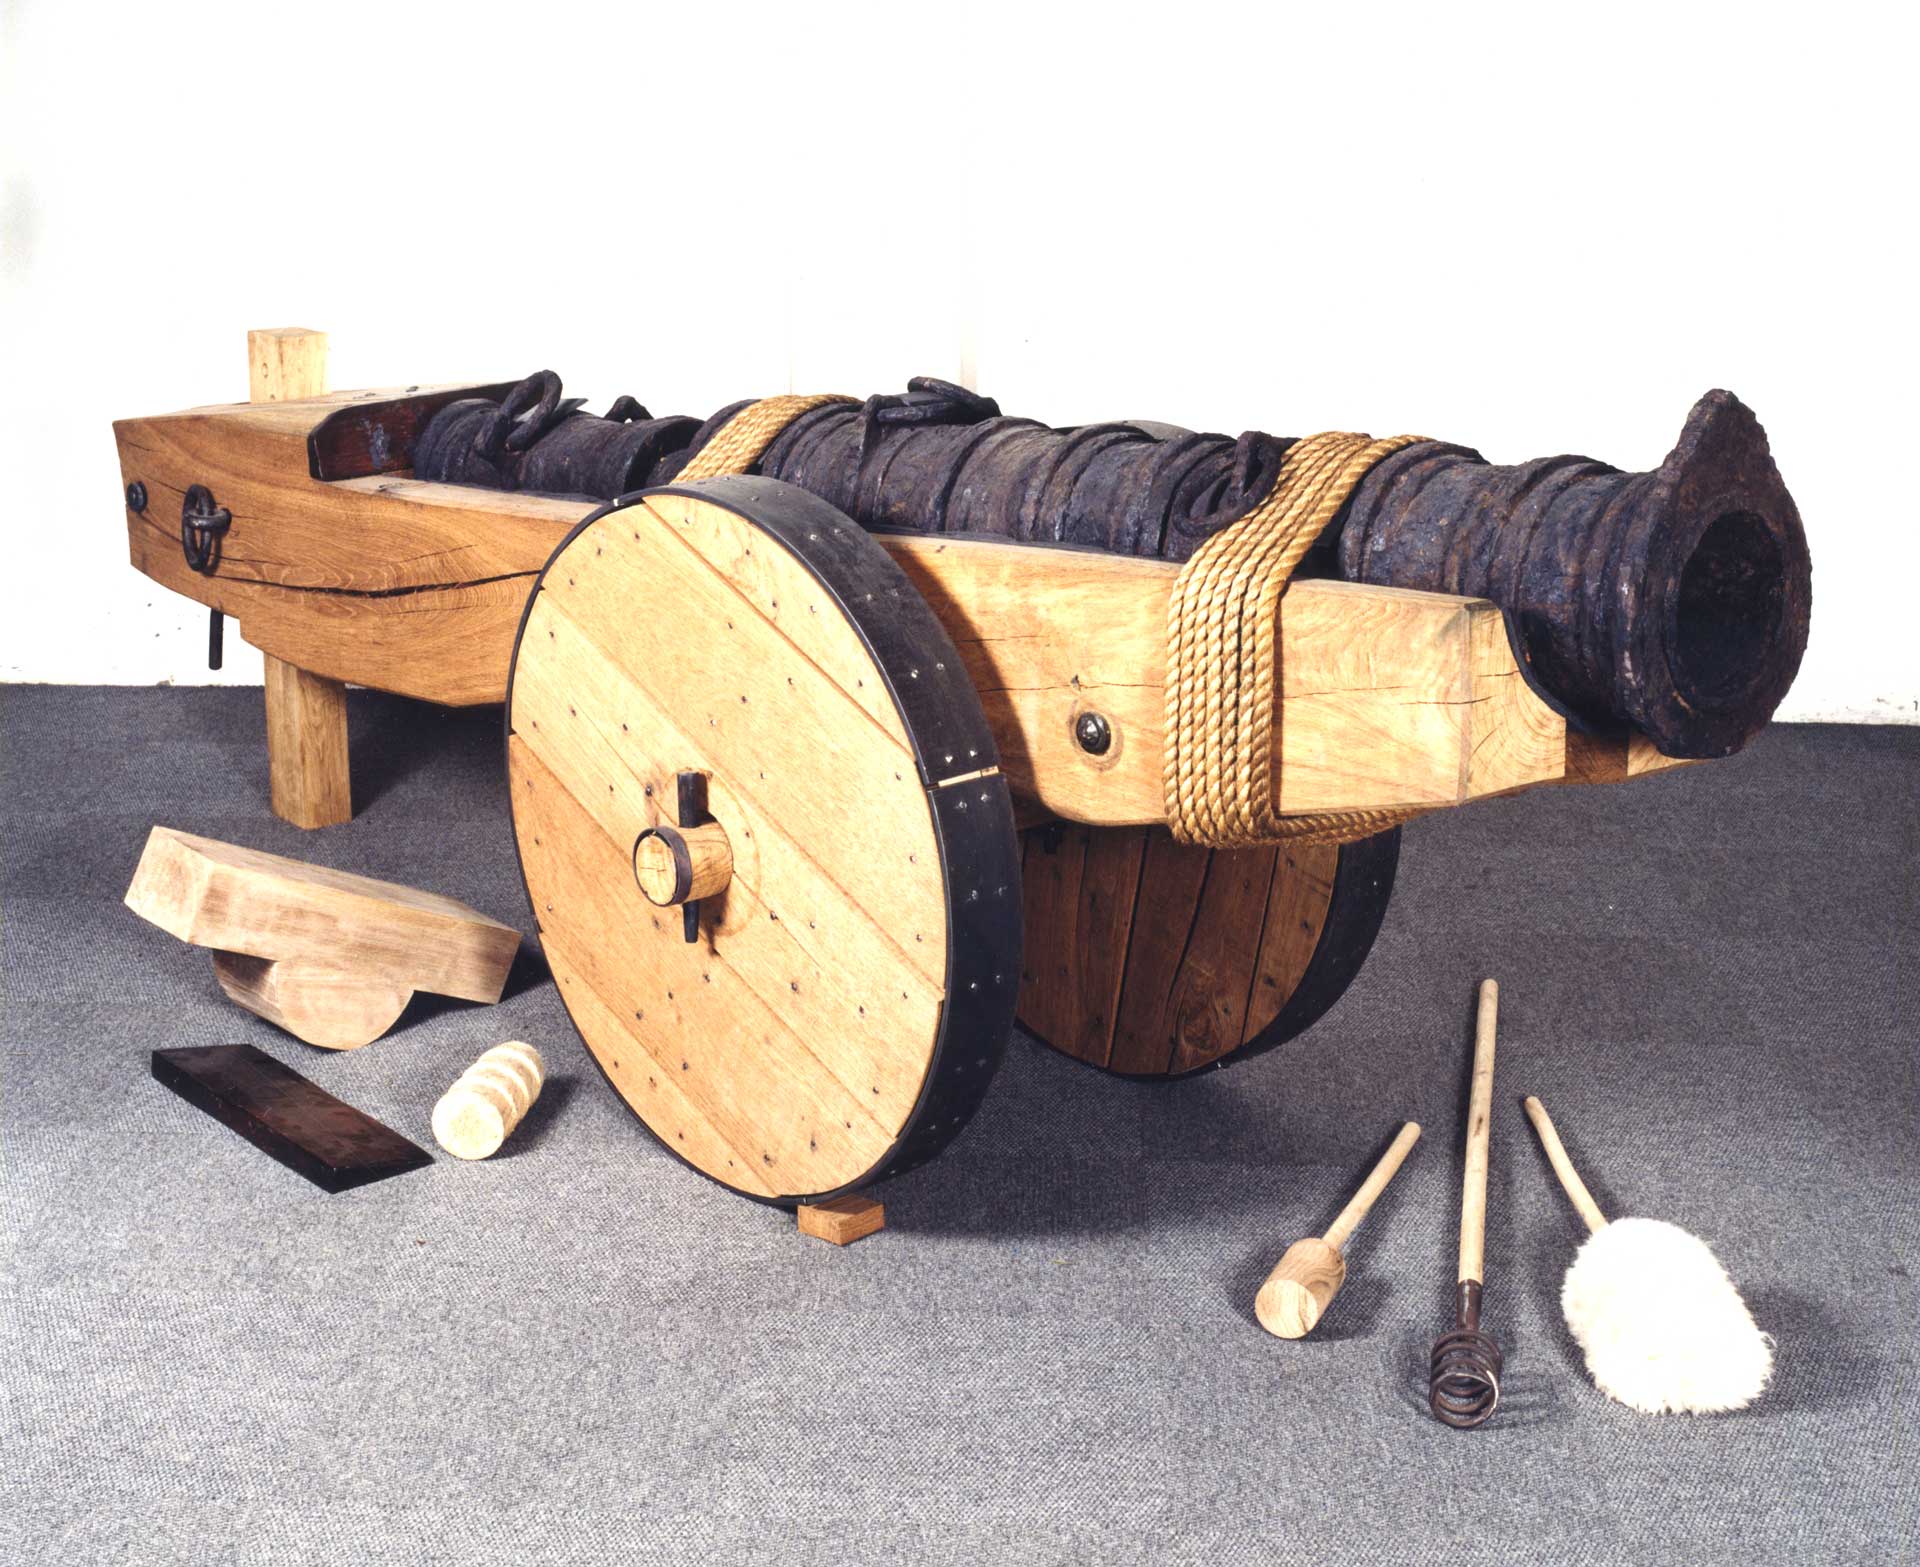 A large metal cannon on a wooden support and wheels